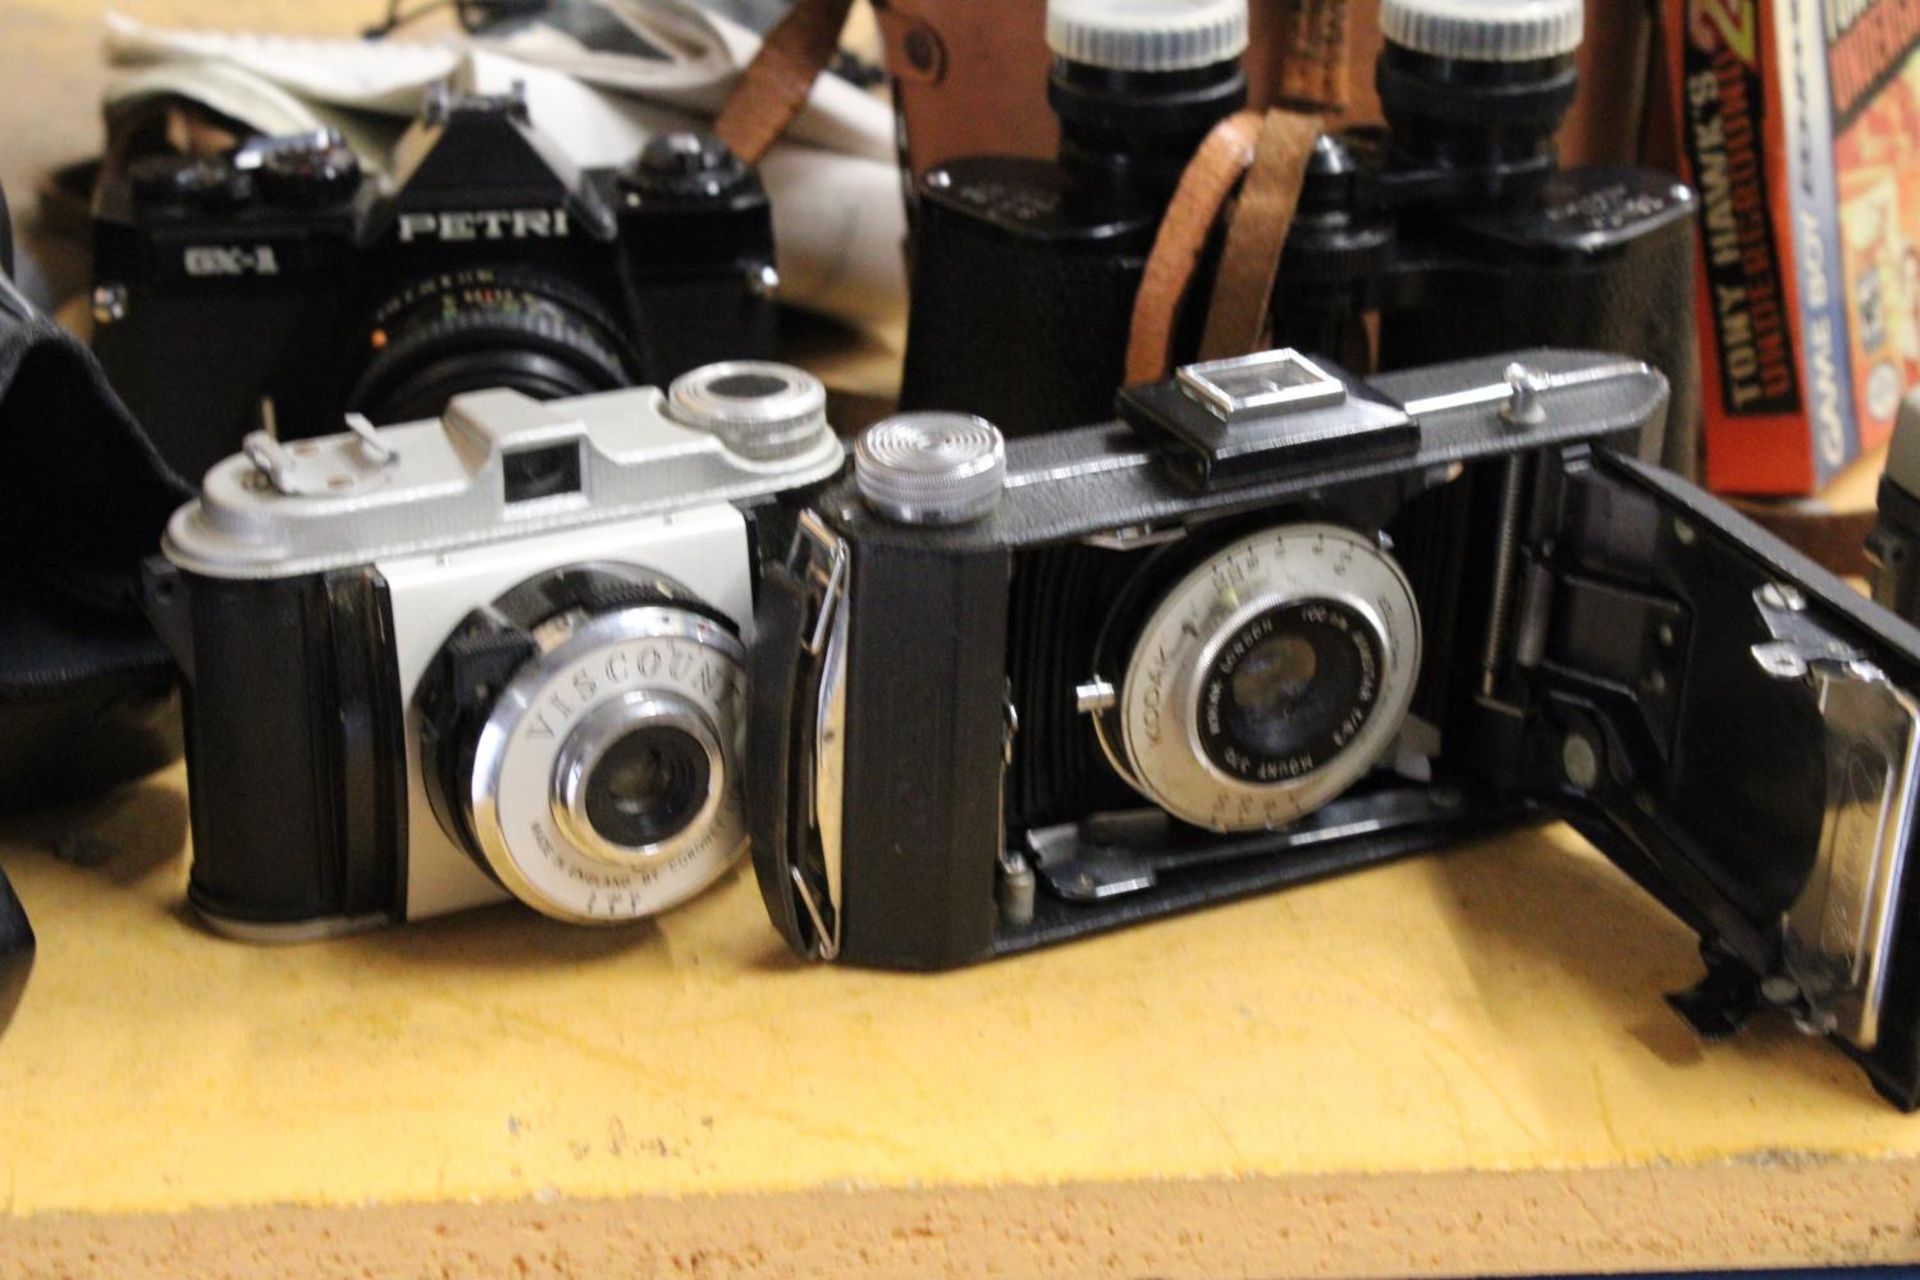 A COLLECTION OF VINTAGE CAMERAS TO INCLUDE A SIX 20 KODAK, AGILUX AGIFLASH, SONY CYBERSHOT, KONICA - Image 6 of 7